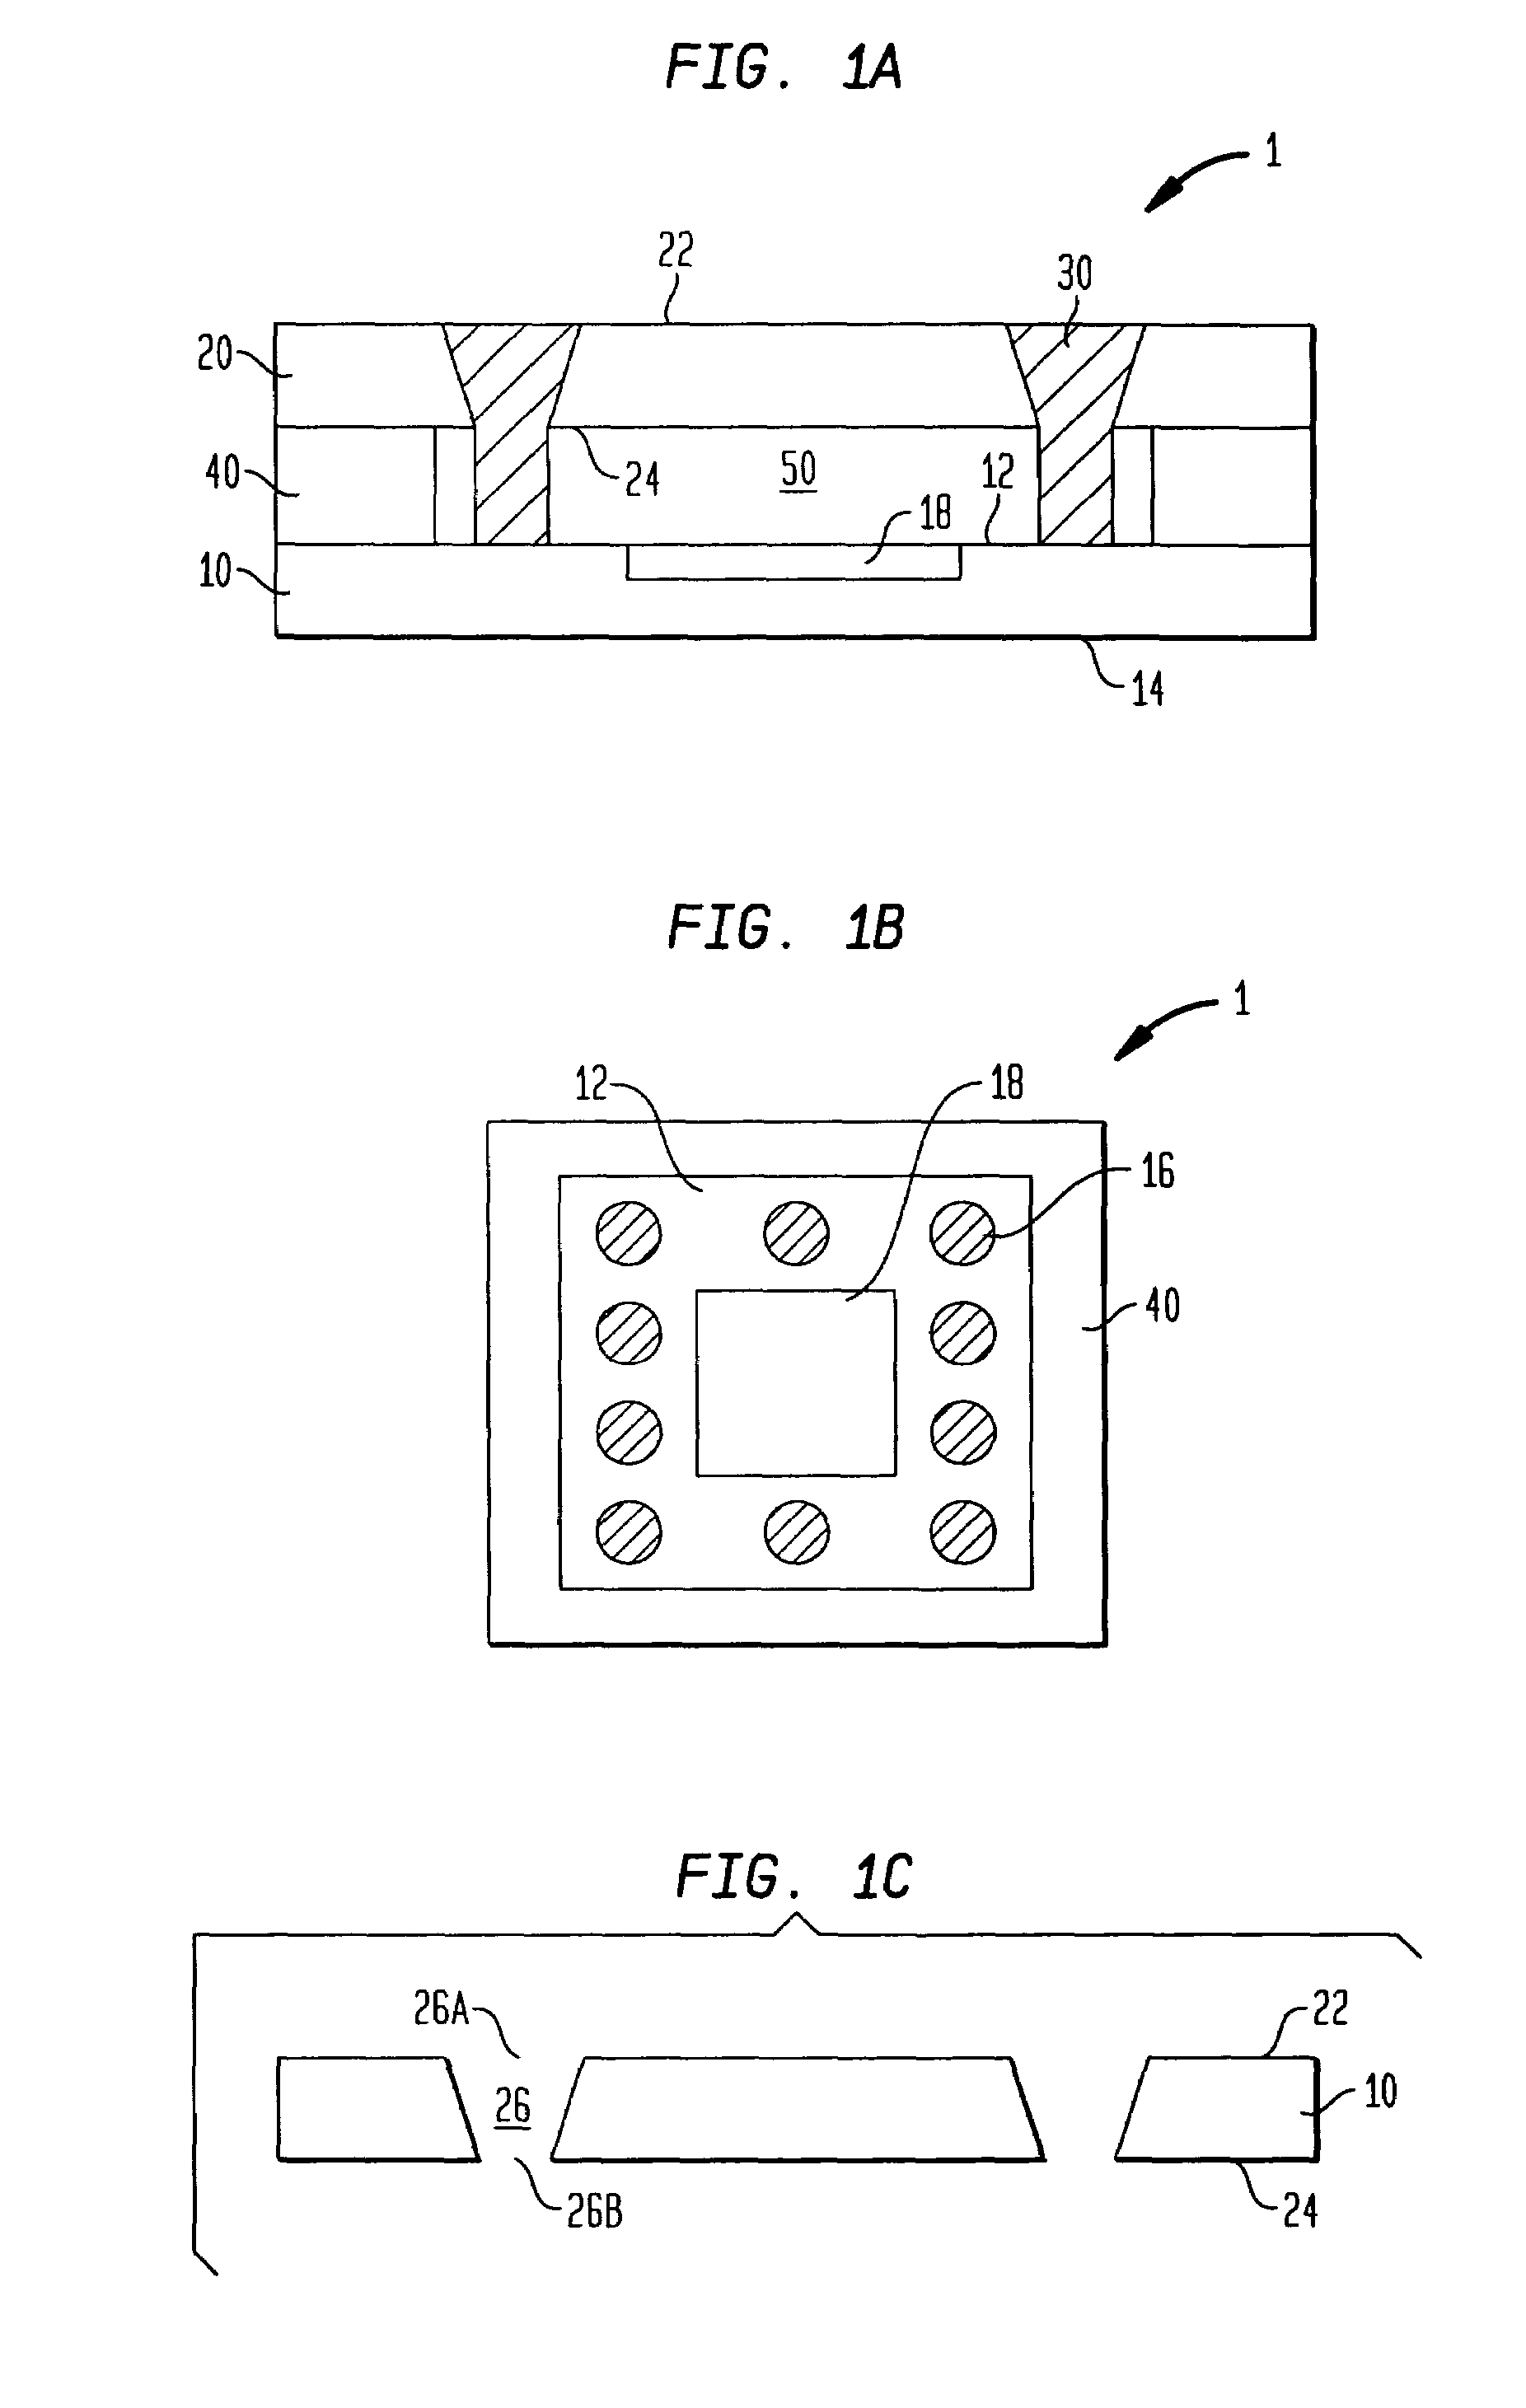 Microelectronic package optionally having differing cover and device thermal expansivities